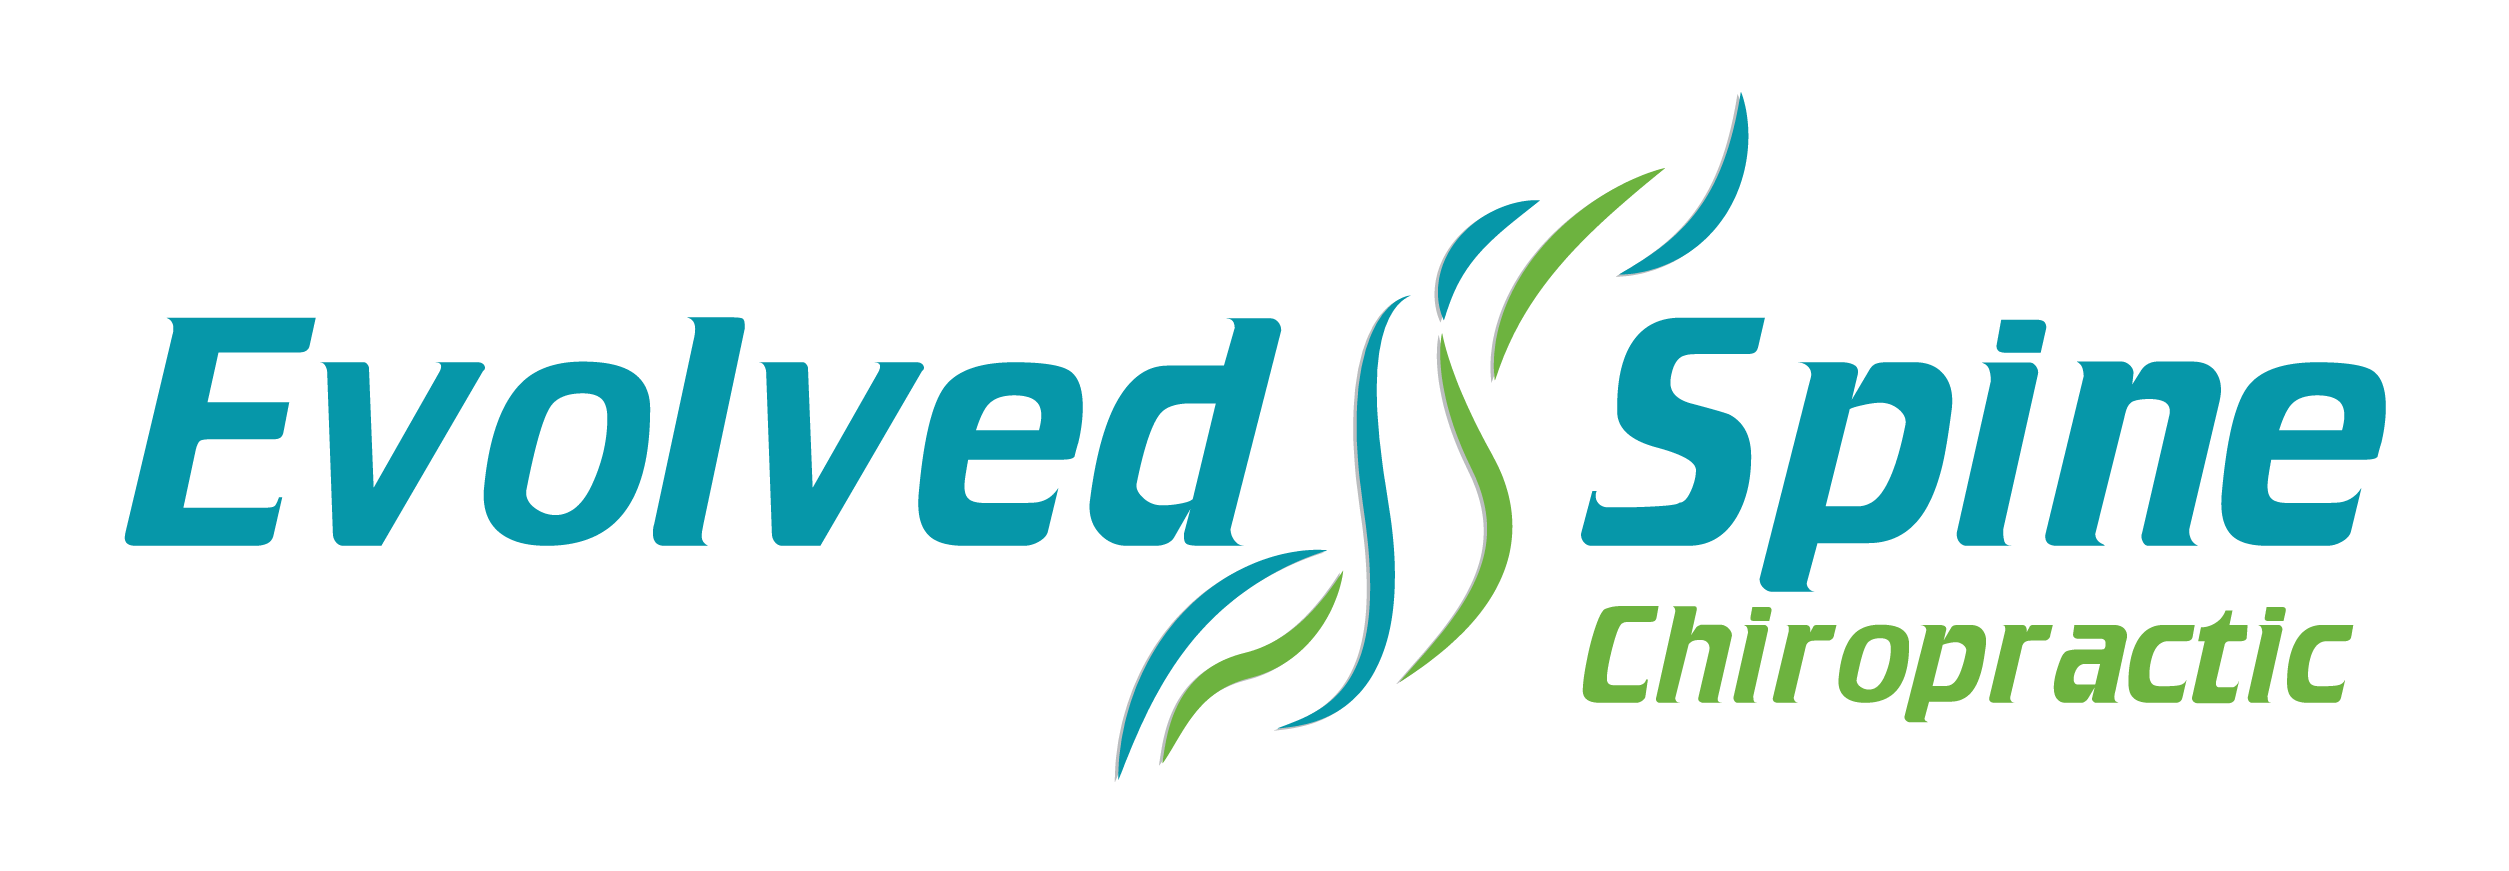 Evolved Spine Chiropractic